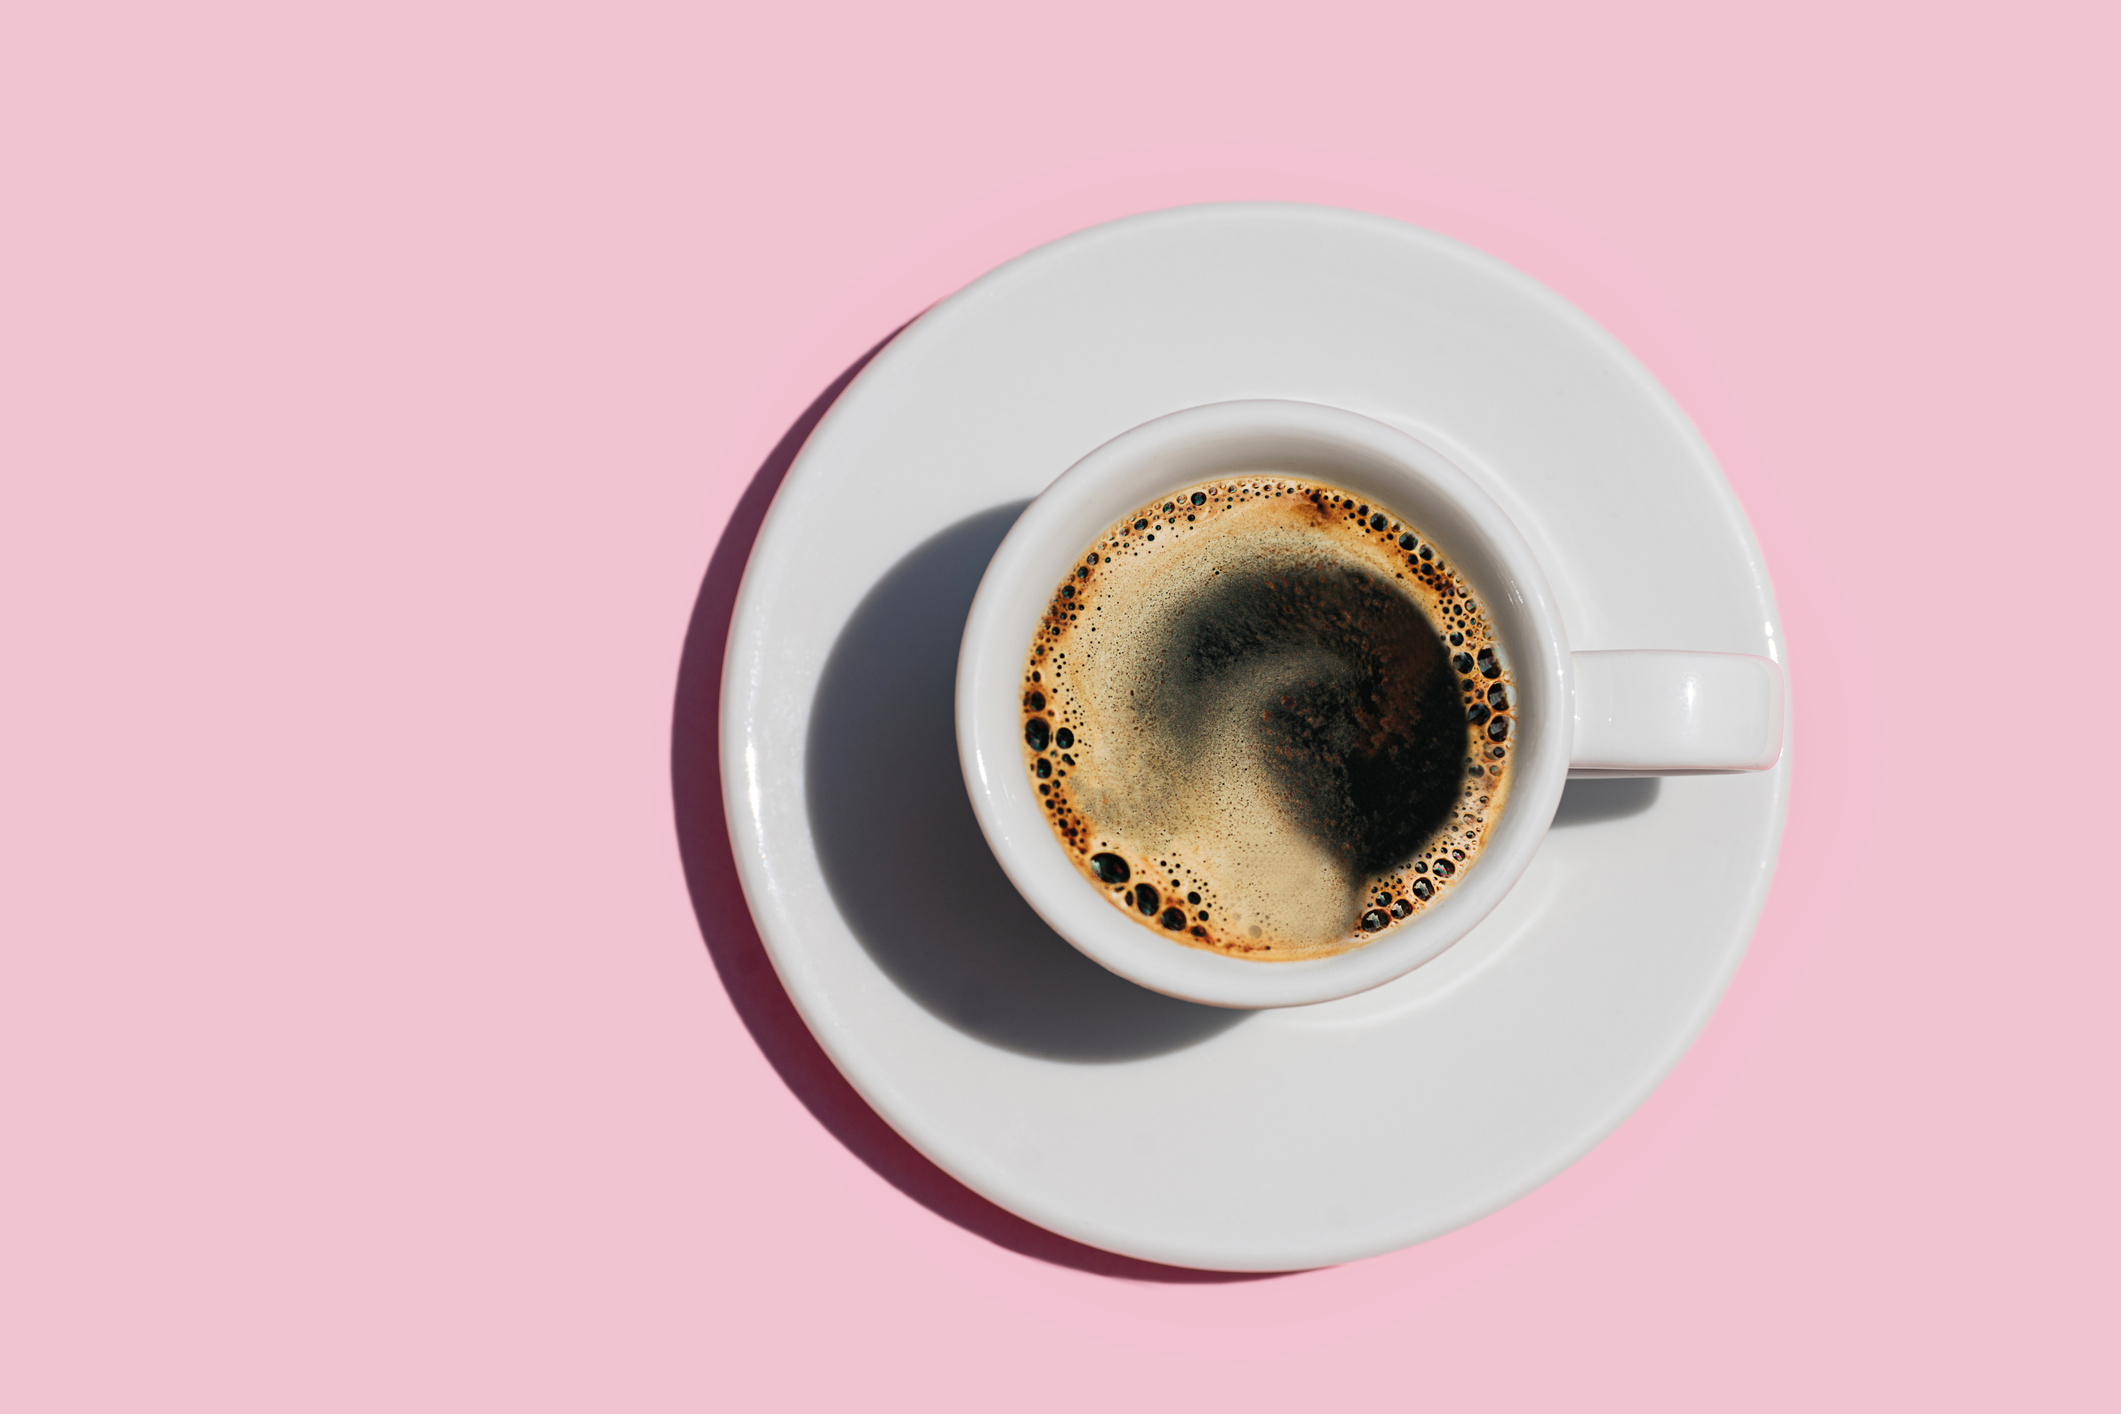 A cup of black coffee sits on a white saucer against a plain background